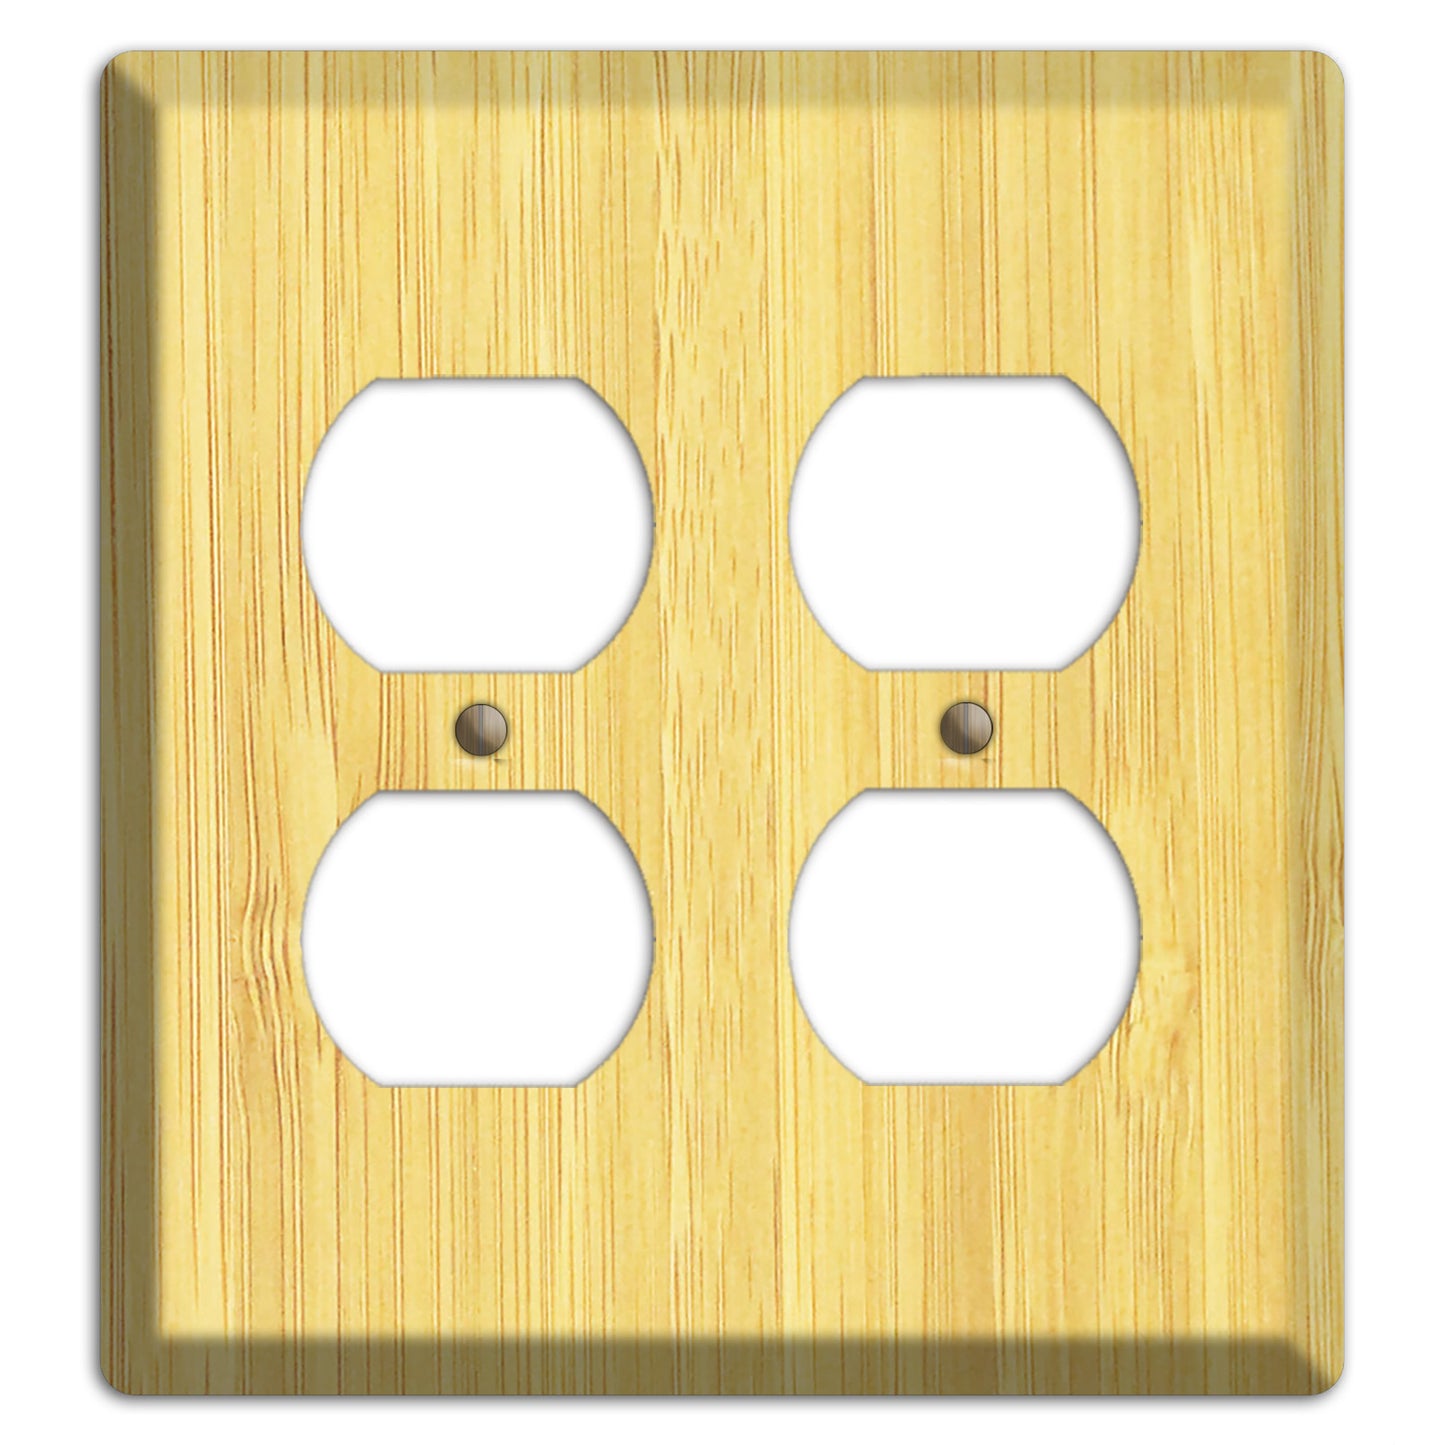 Natural Bamboo Wood 2 Duplex Outlet Cover Plate